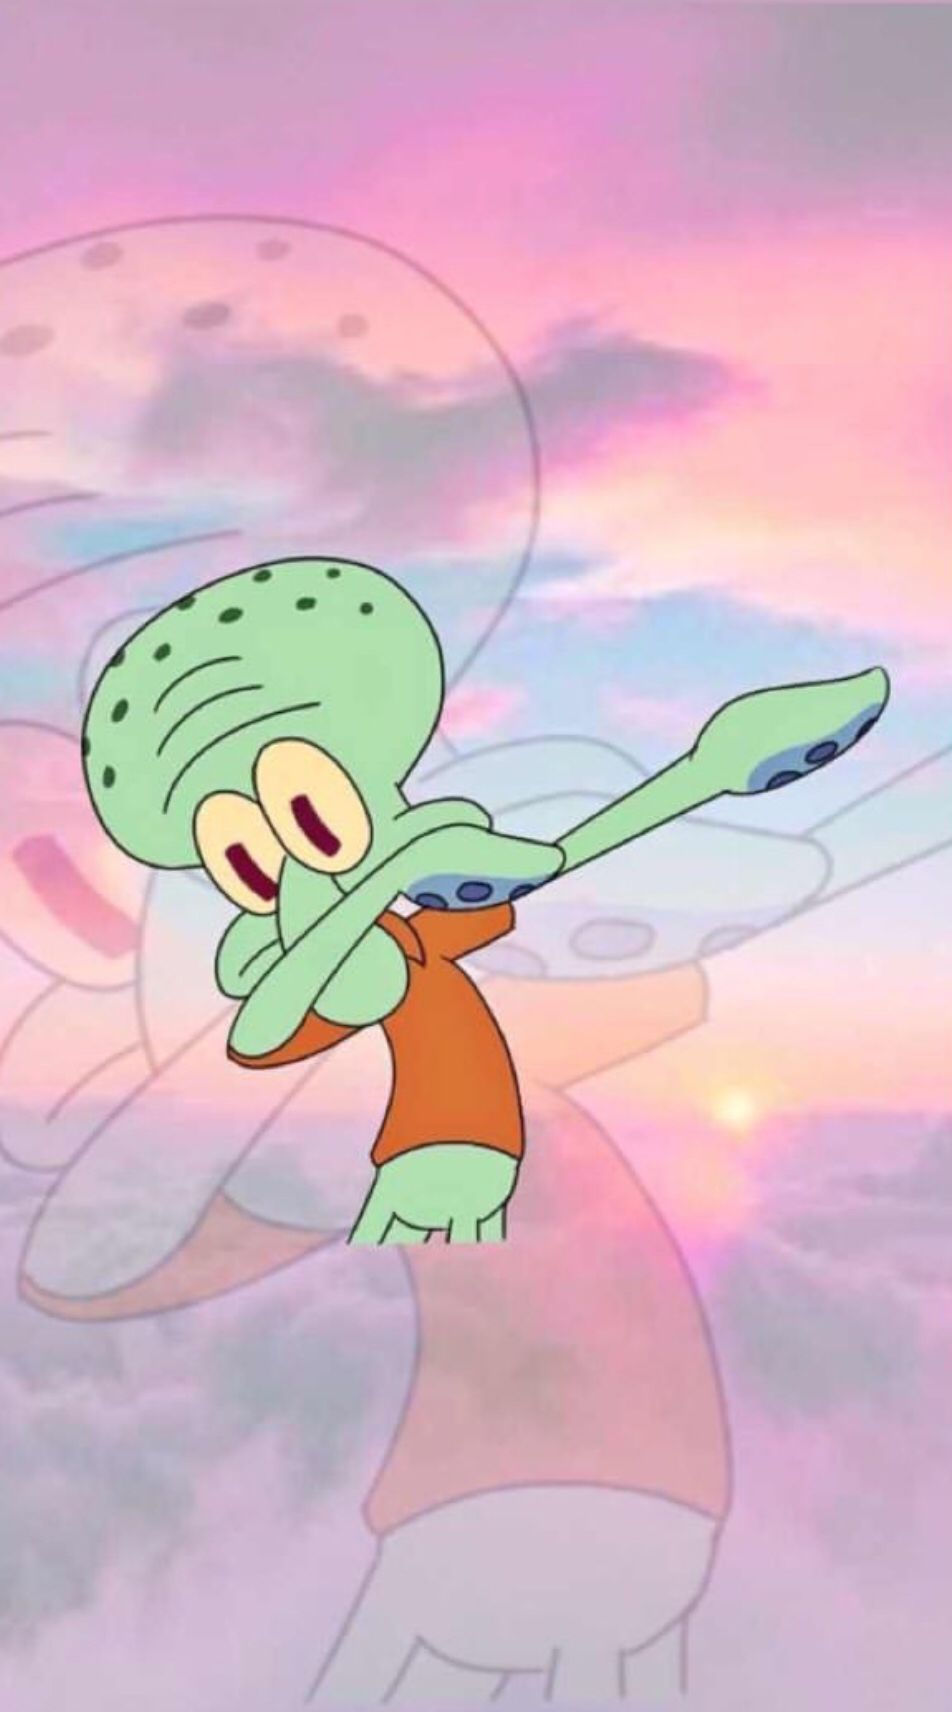 Aesthetic image of Squidward from Spongebob doing the dab. - Squidward